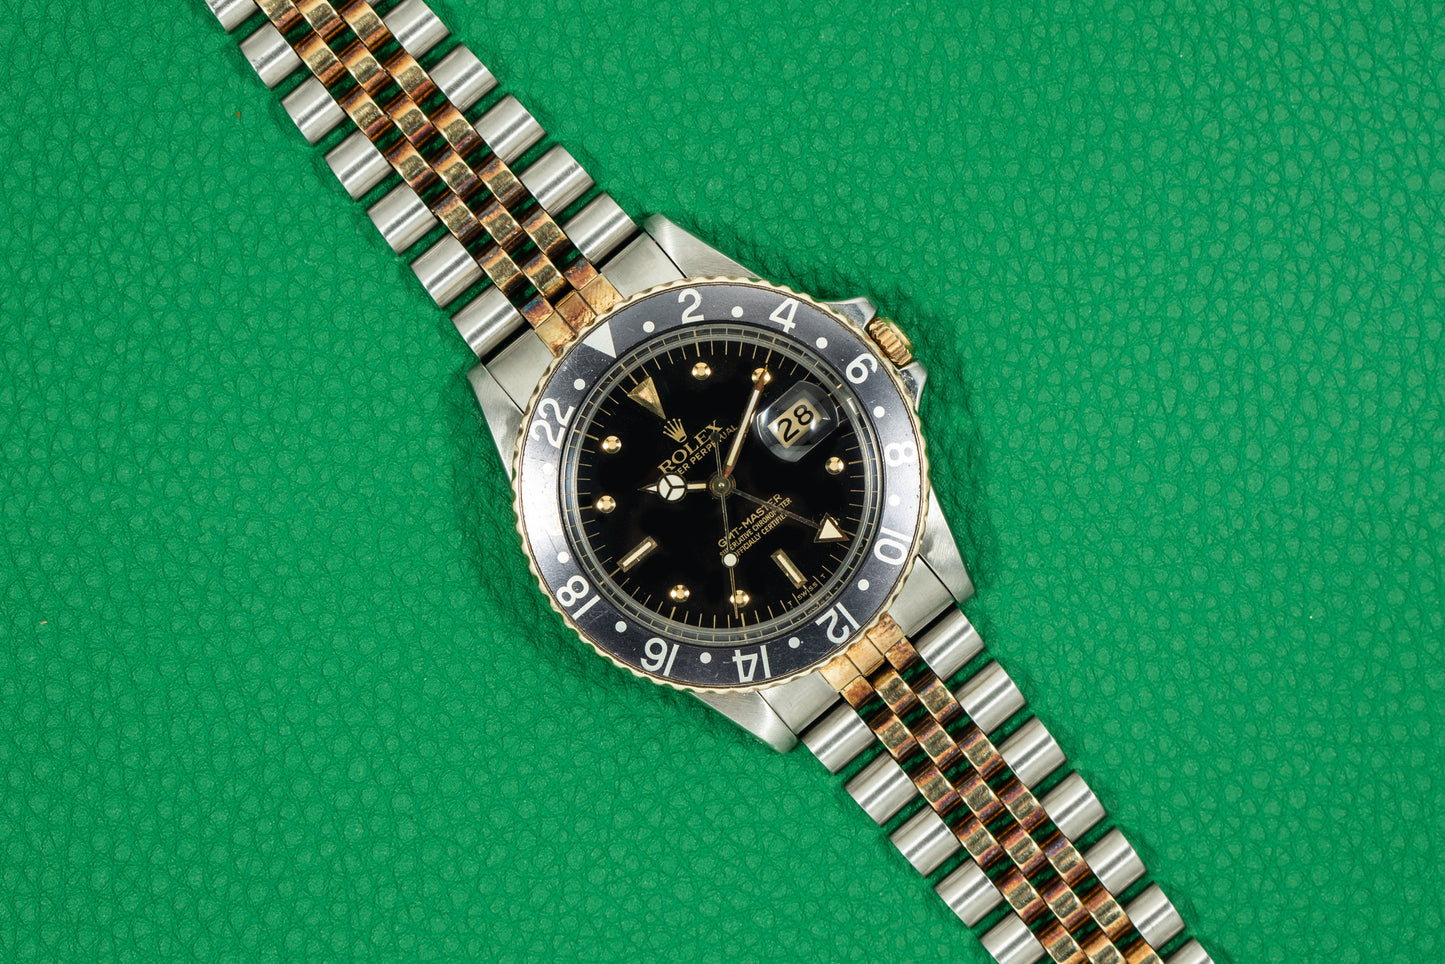 Rolex GMT-Master Two-Tone